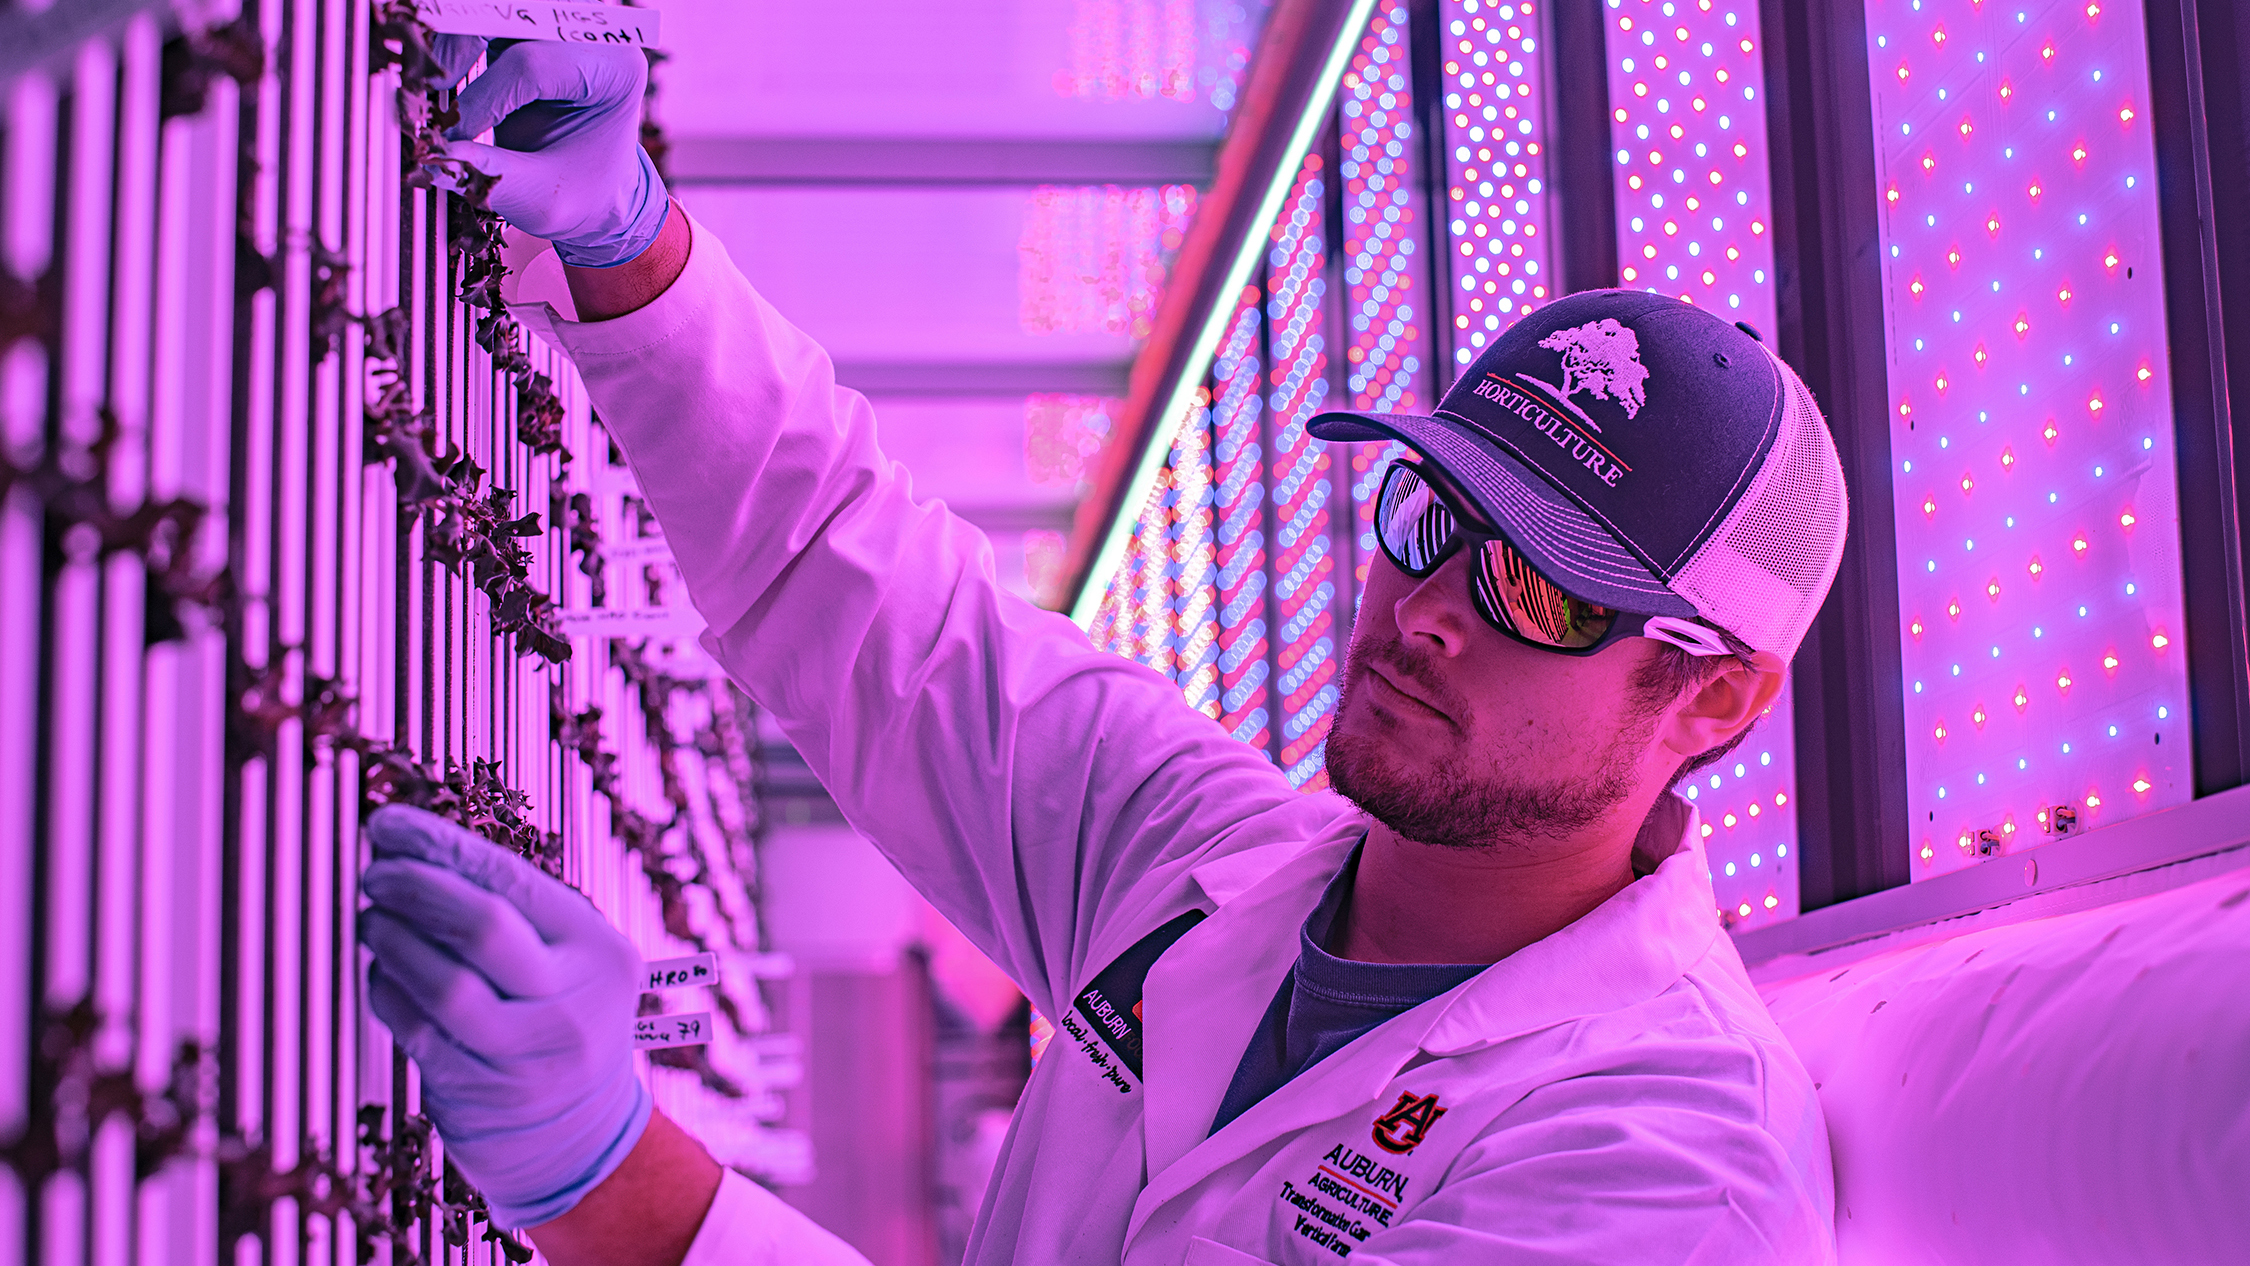 Graduate students work in the vertical farm shipping containers